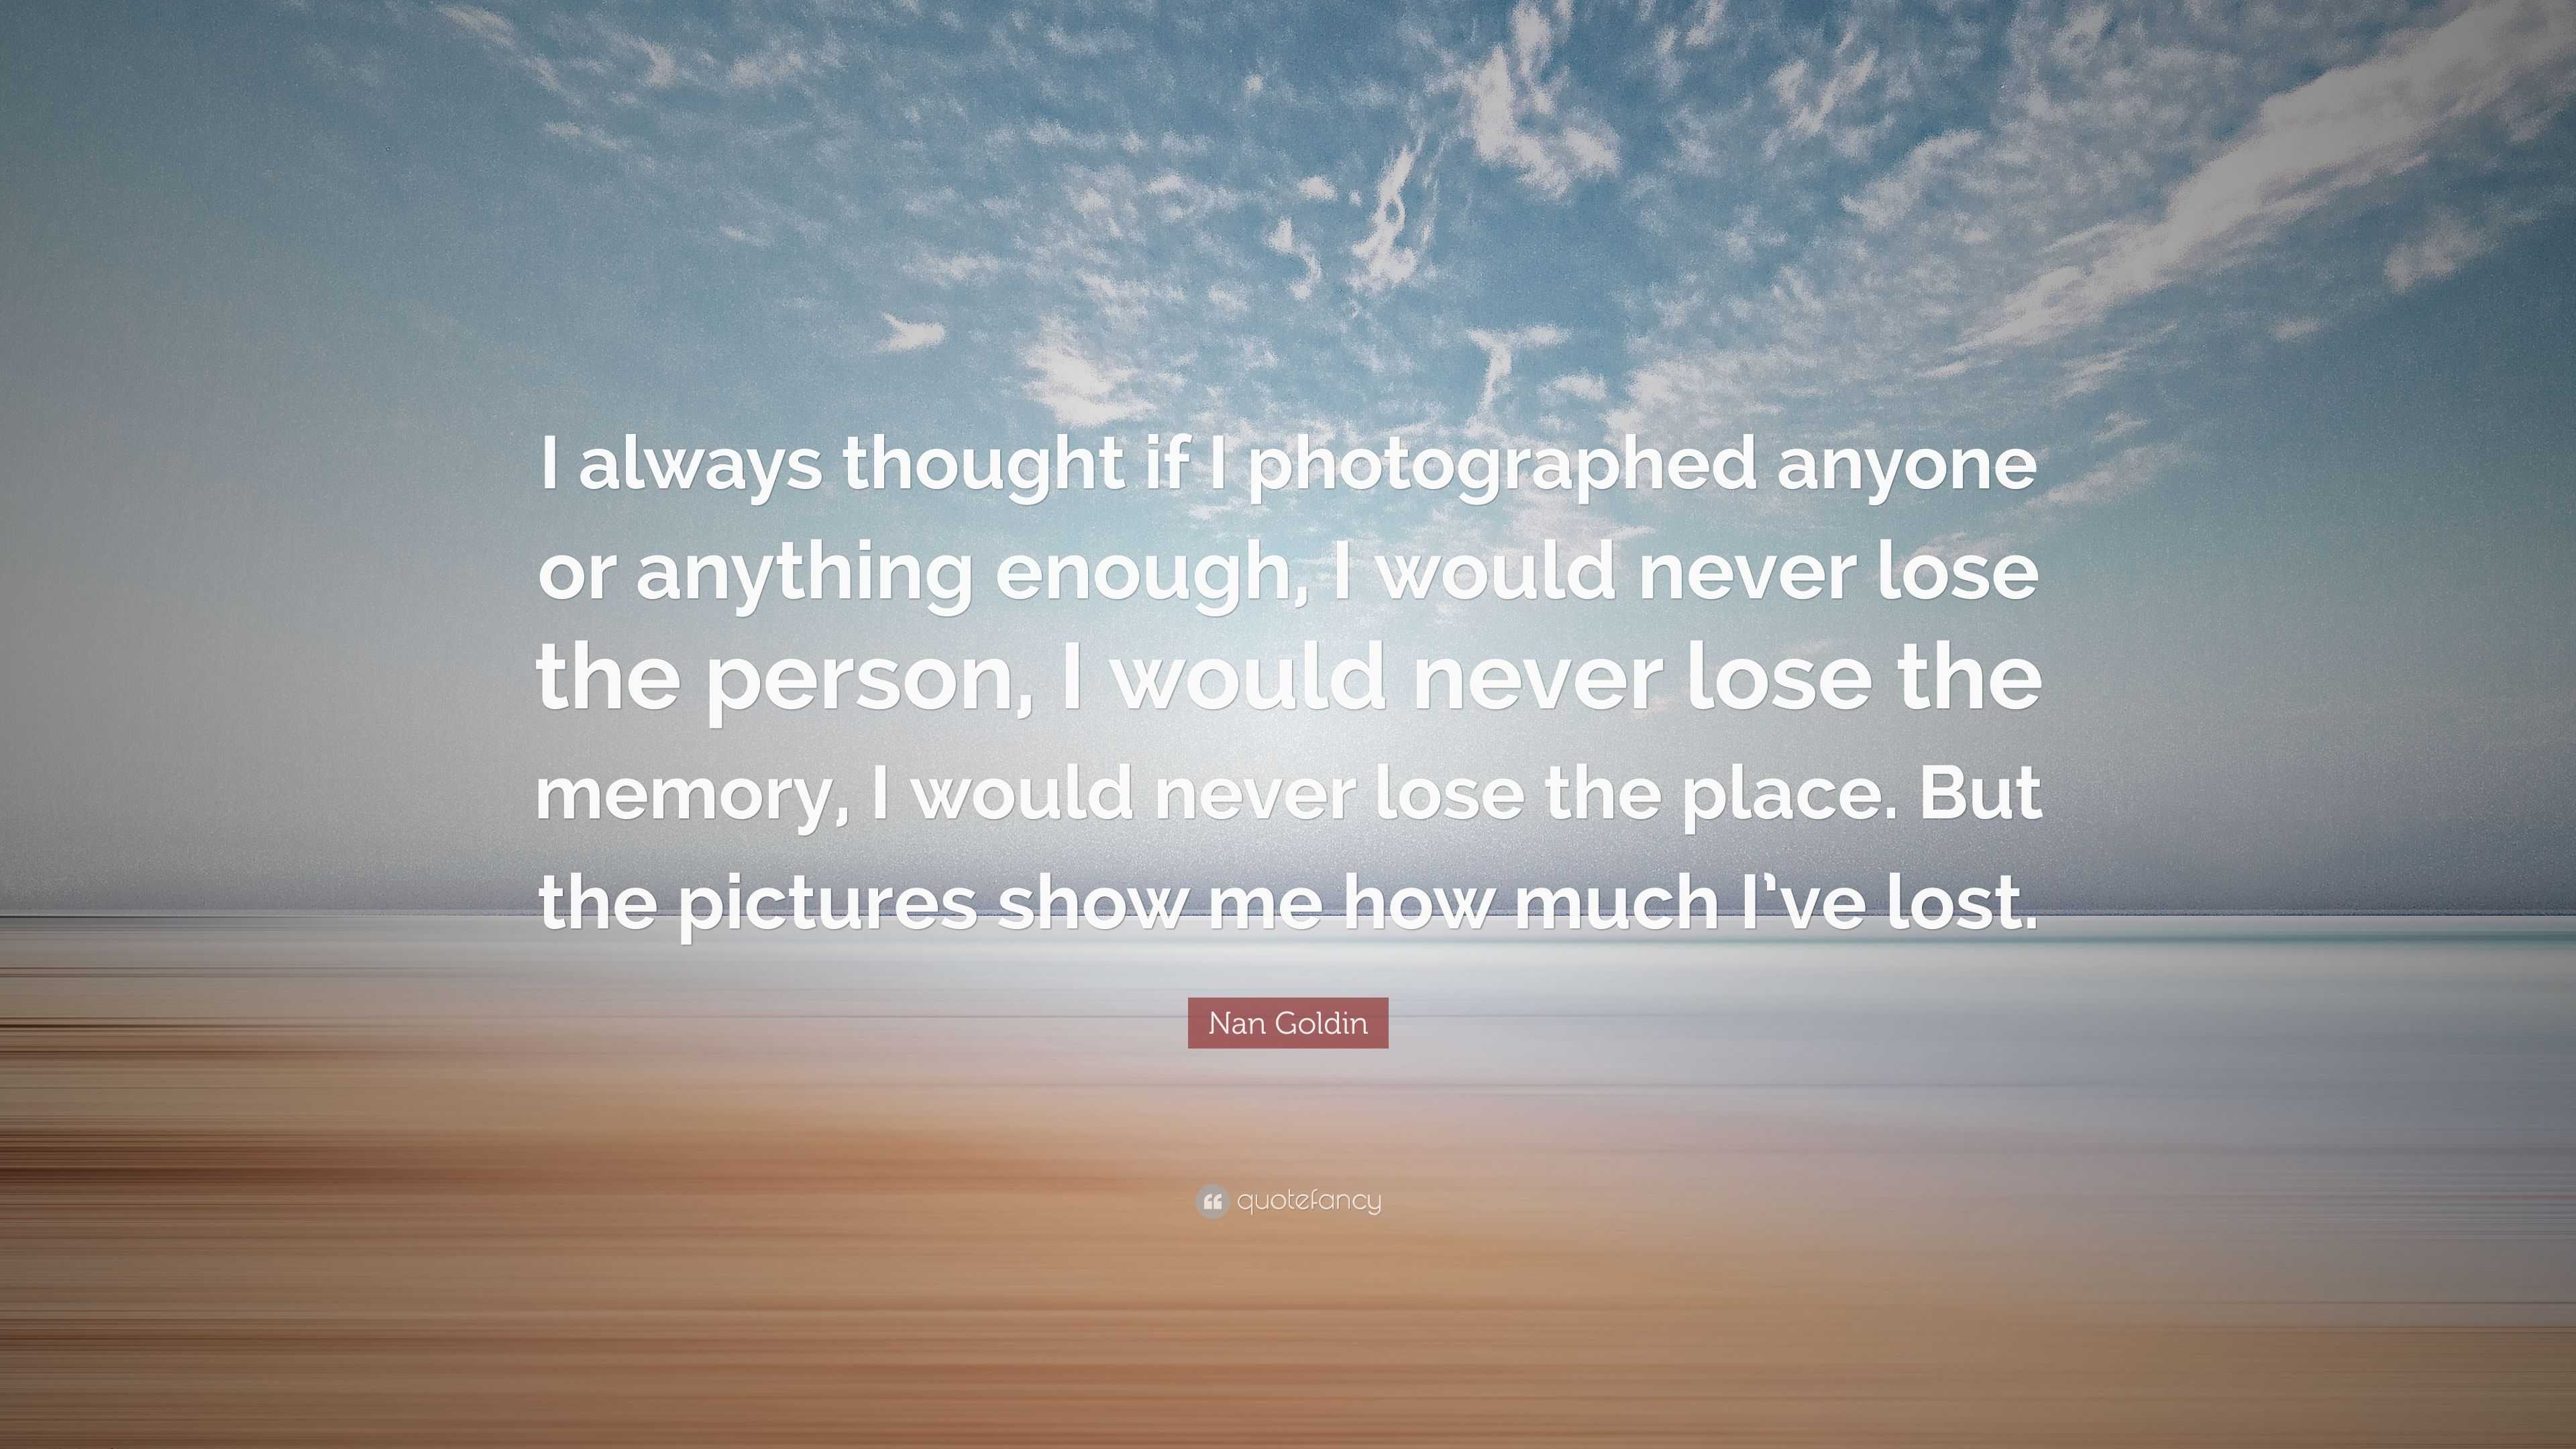 Nan Goldin Quote: “I always thought if I photographed anyone or ...